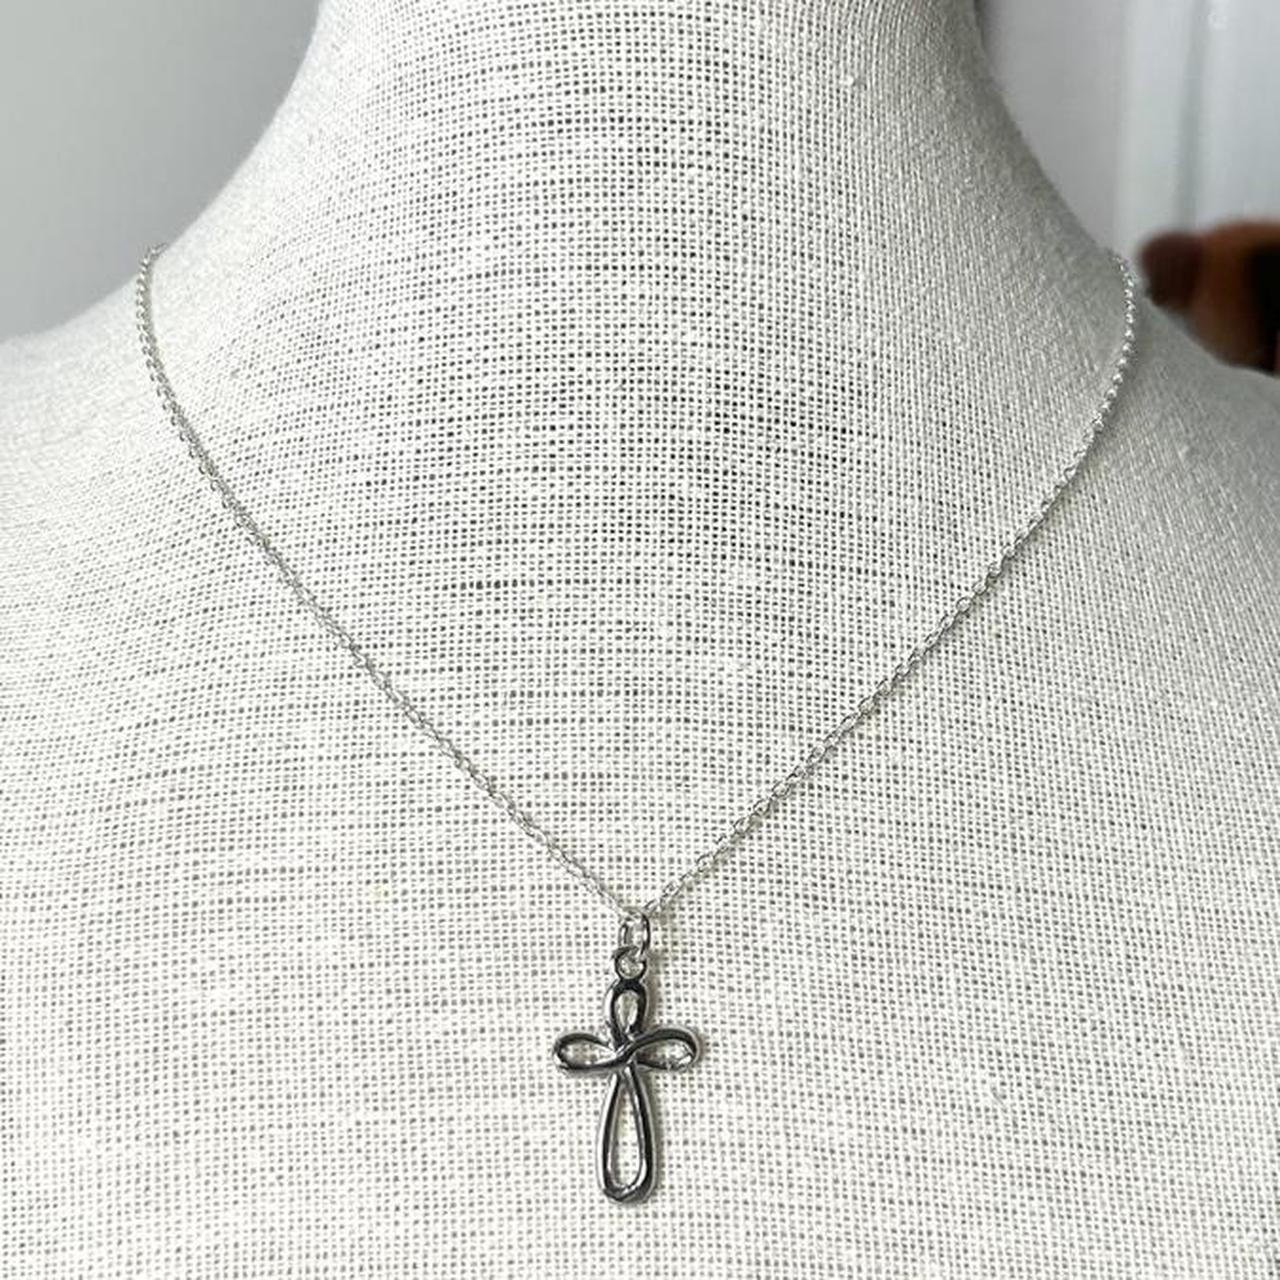 Classic Women CROSS Necklace. Sterling Silver Cross for Women. Plain Cross  Necklace, Choose Sterling Chain. Mom Grandma Gift. 5143 - Etsy | Sterling silver  cross, Sterling silver cross necklace, Mens silver necklace